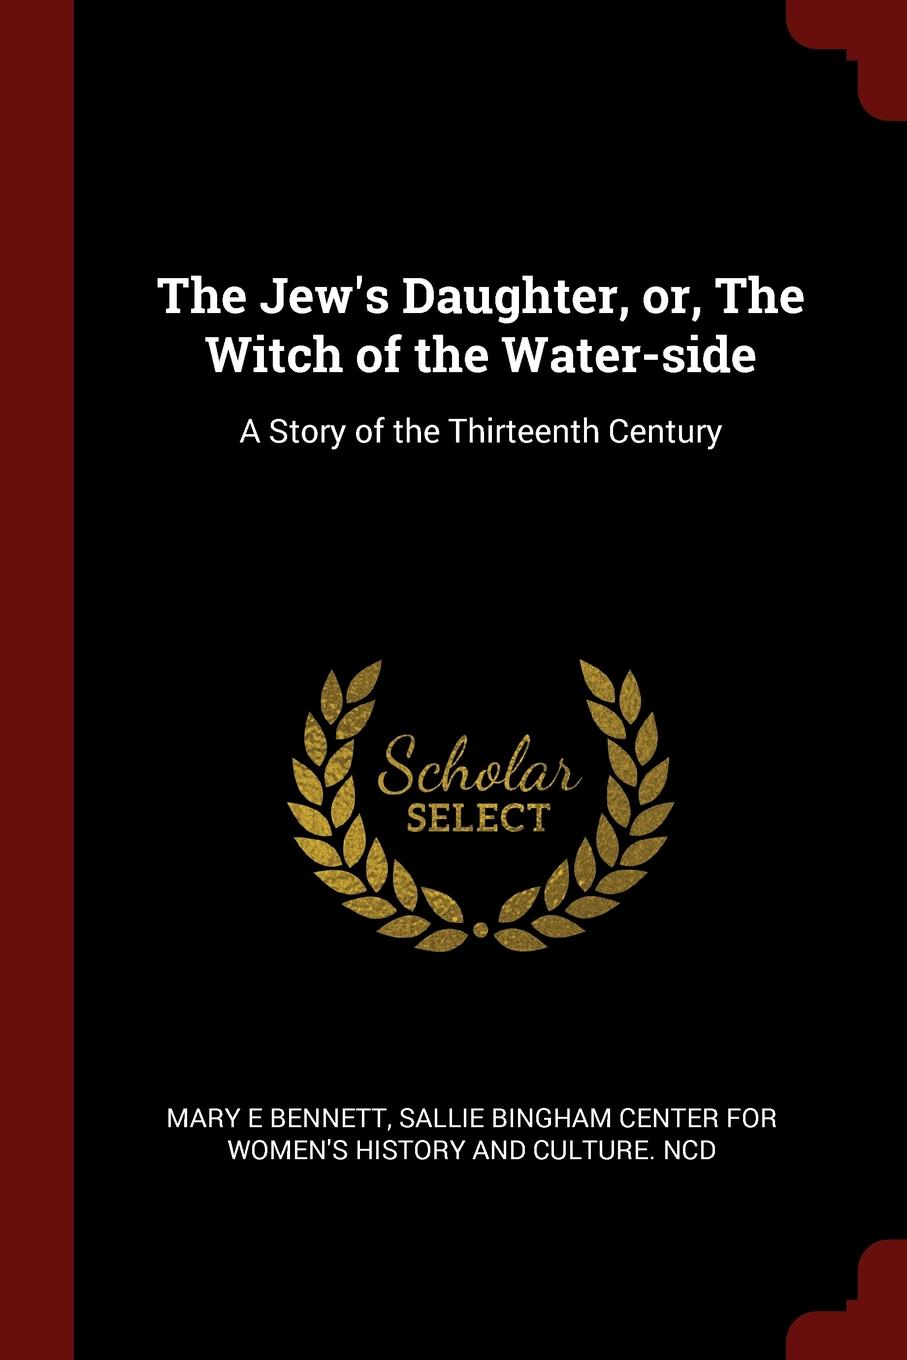 The Jew.s Daughter, or, The Witch of the Water-side. A Story of the Thirteenth Century